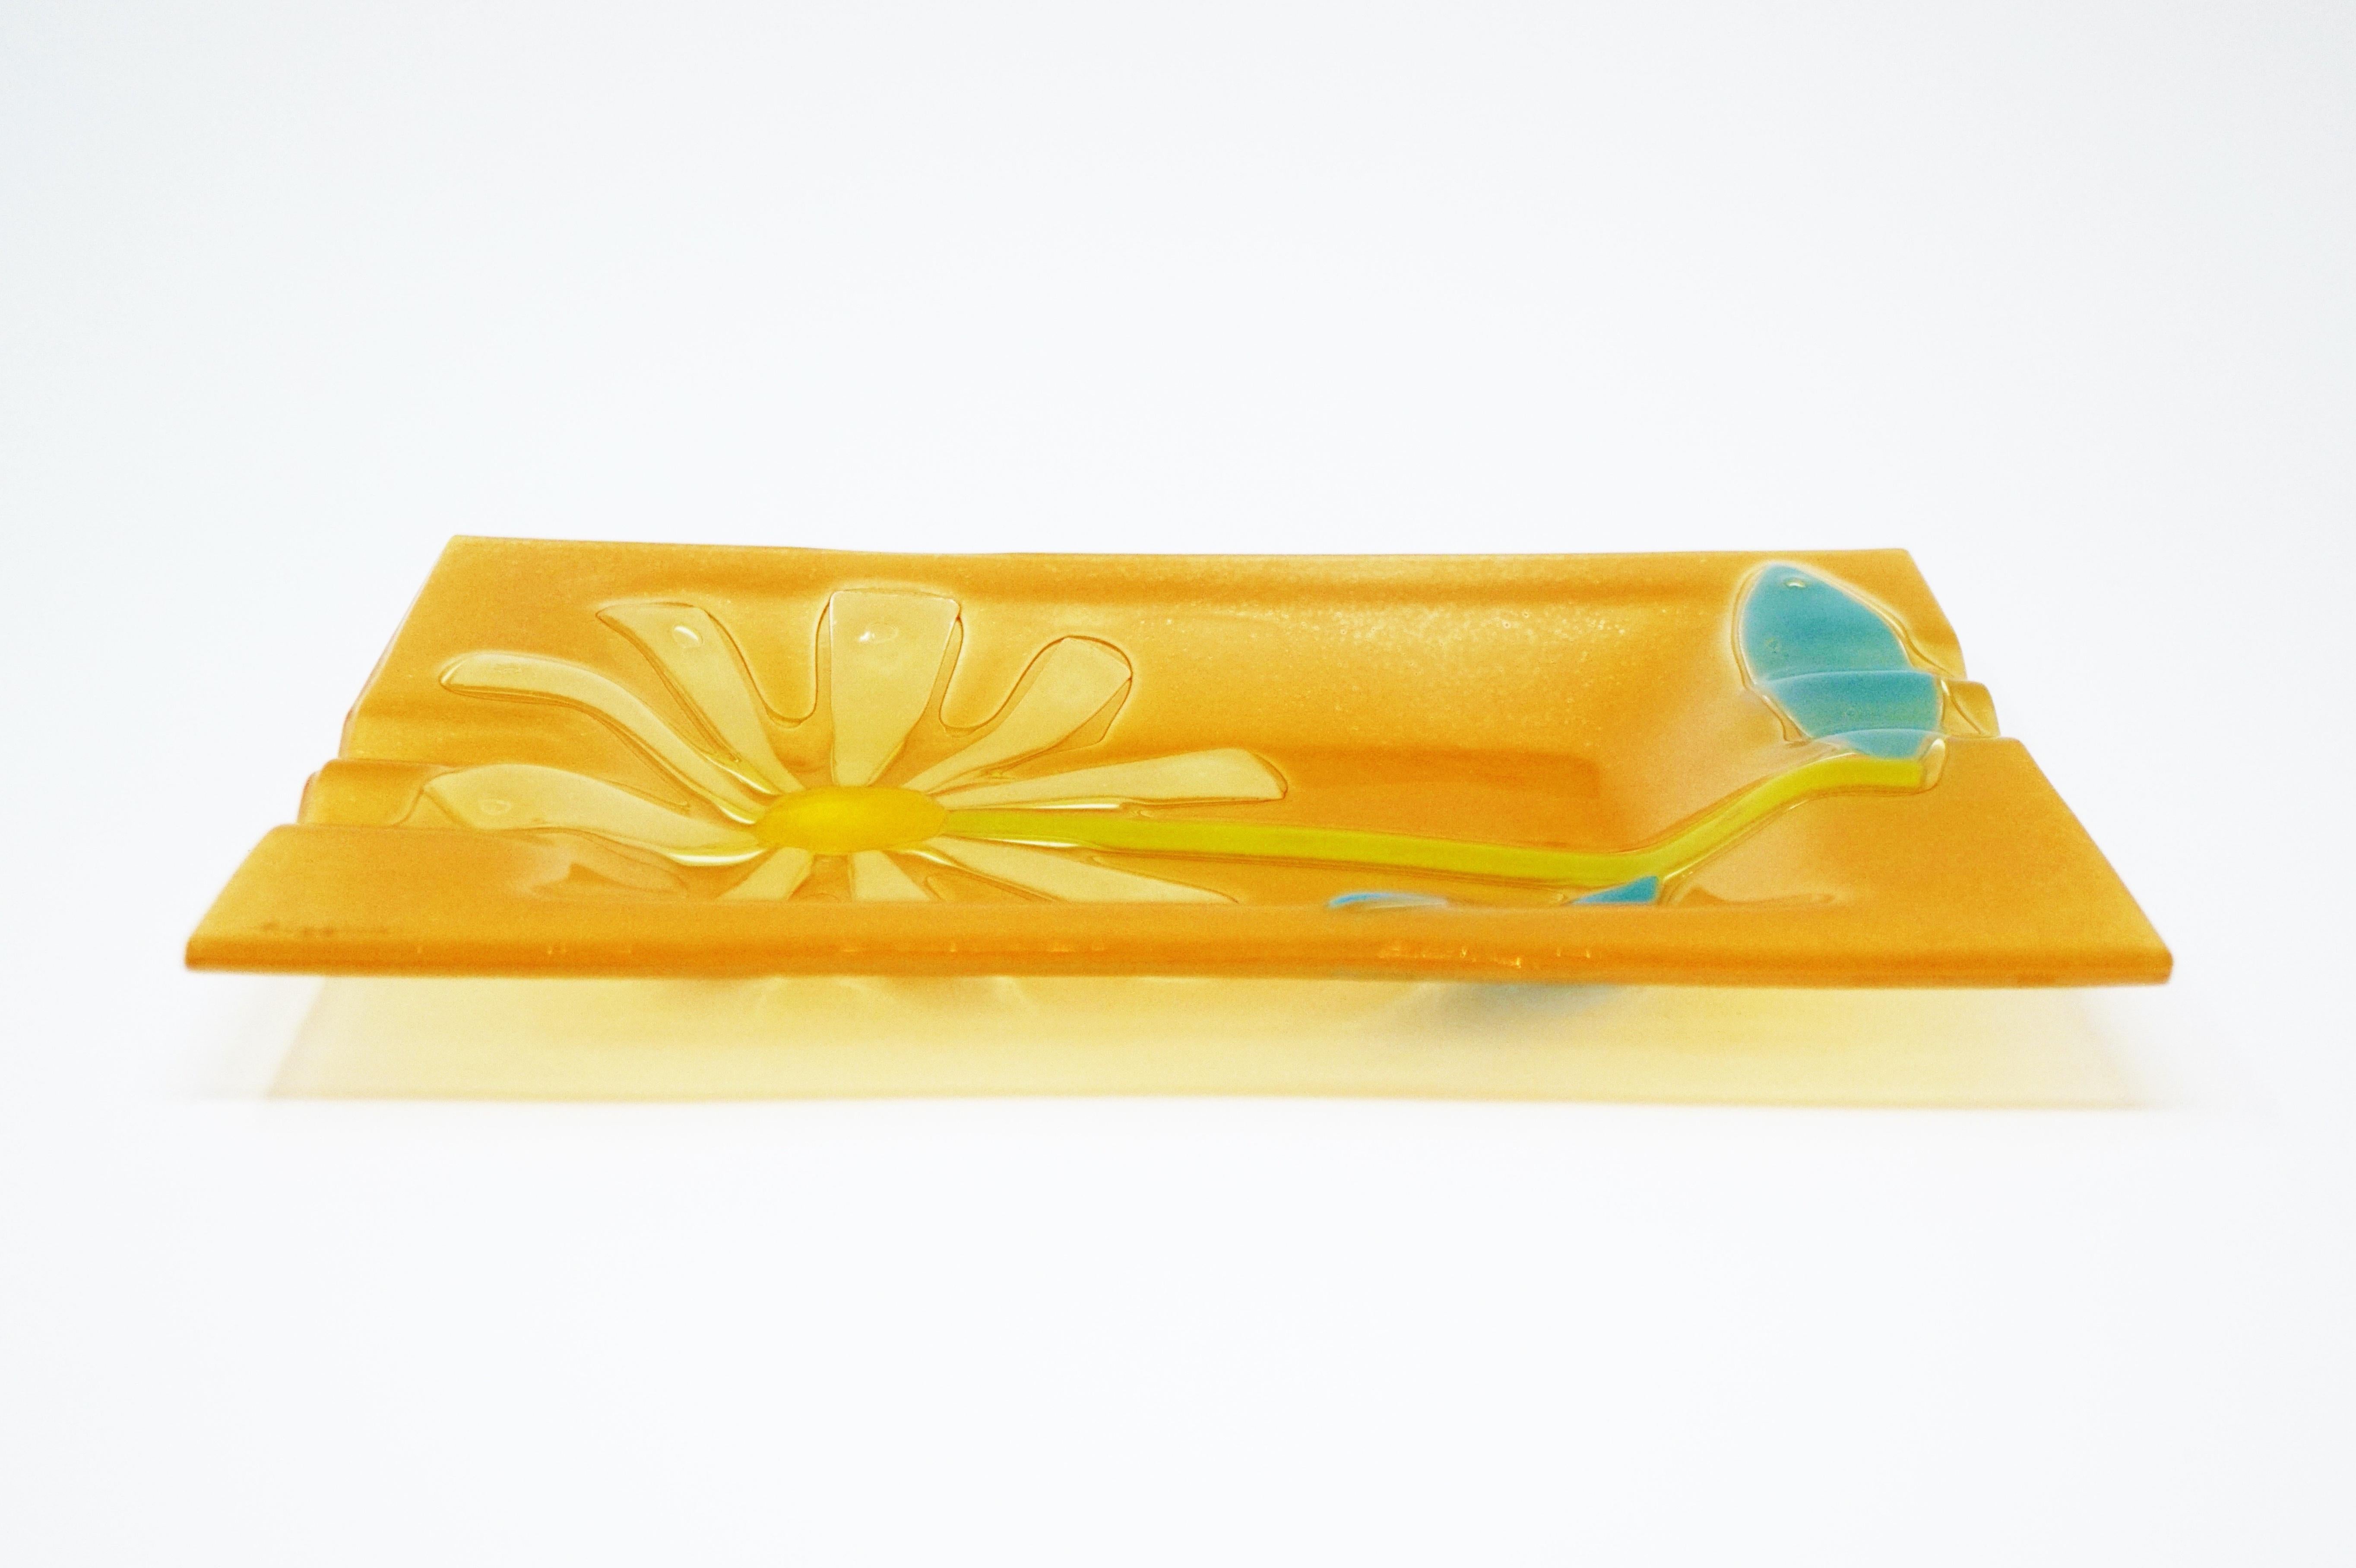 Mid-Century Modern Floral Fused Art Glass Ashtray by Higgins, Signed, circa 1950s